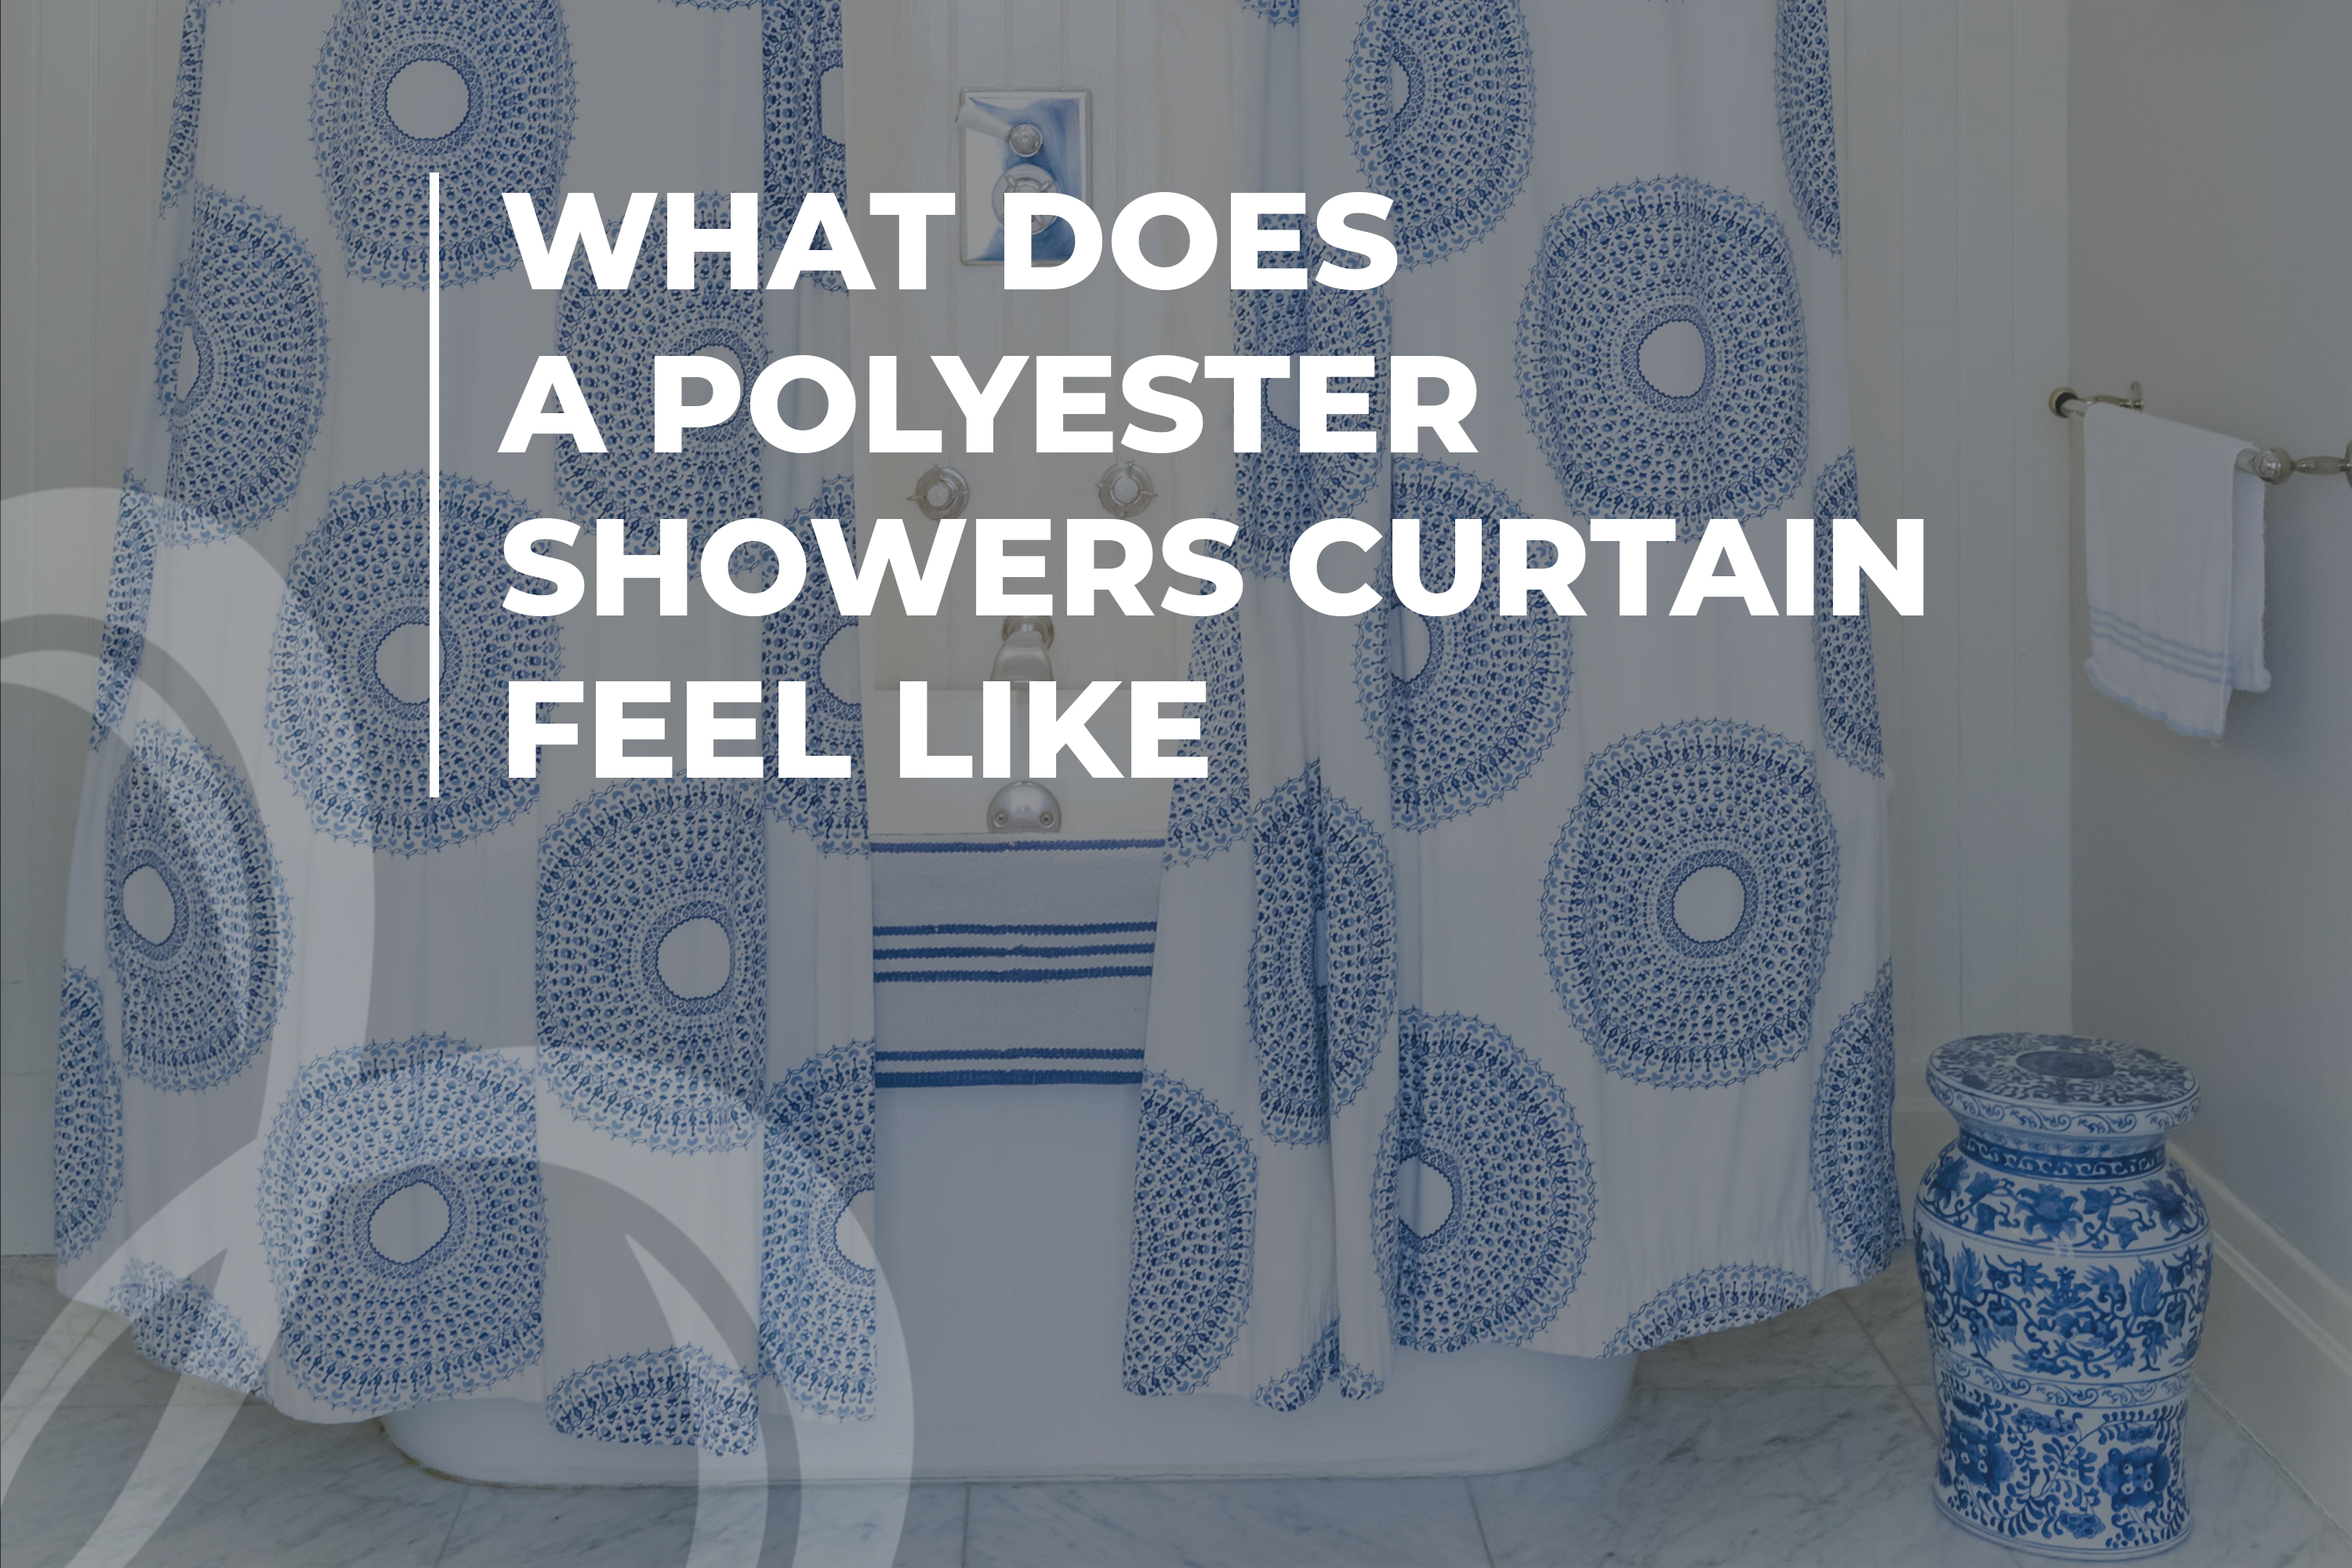 What Does a Polyester Showers Curtain Feel Like